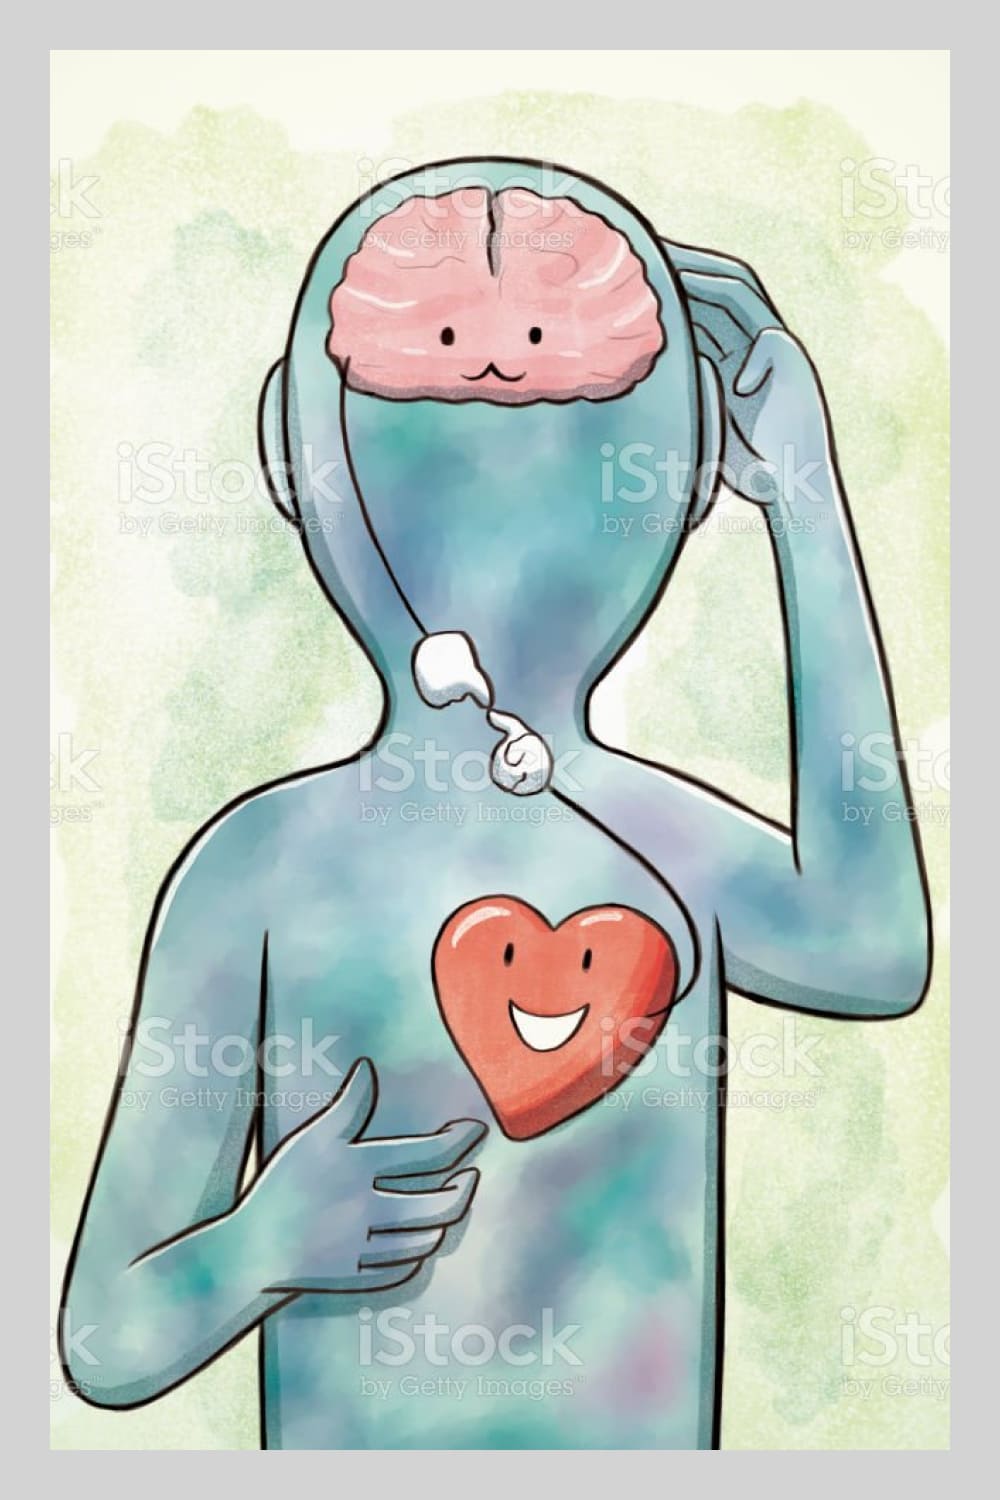 Connection of brain and heart stock illustration.